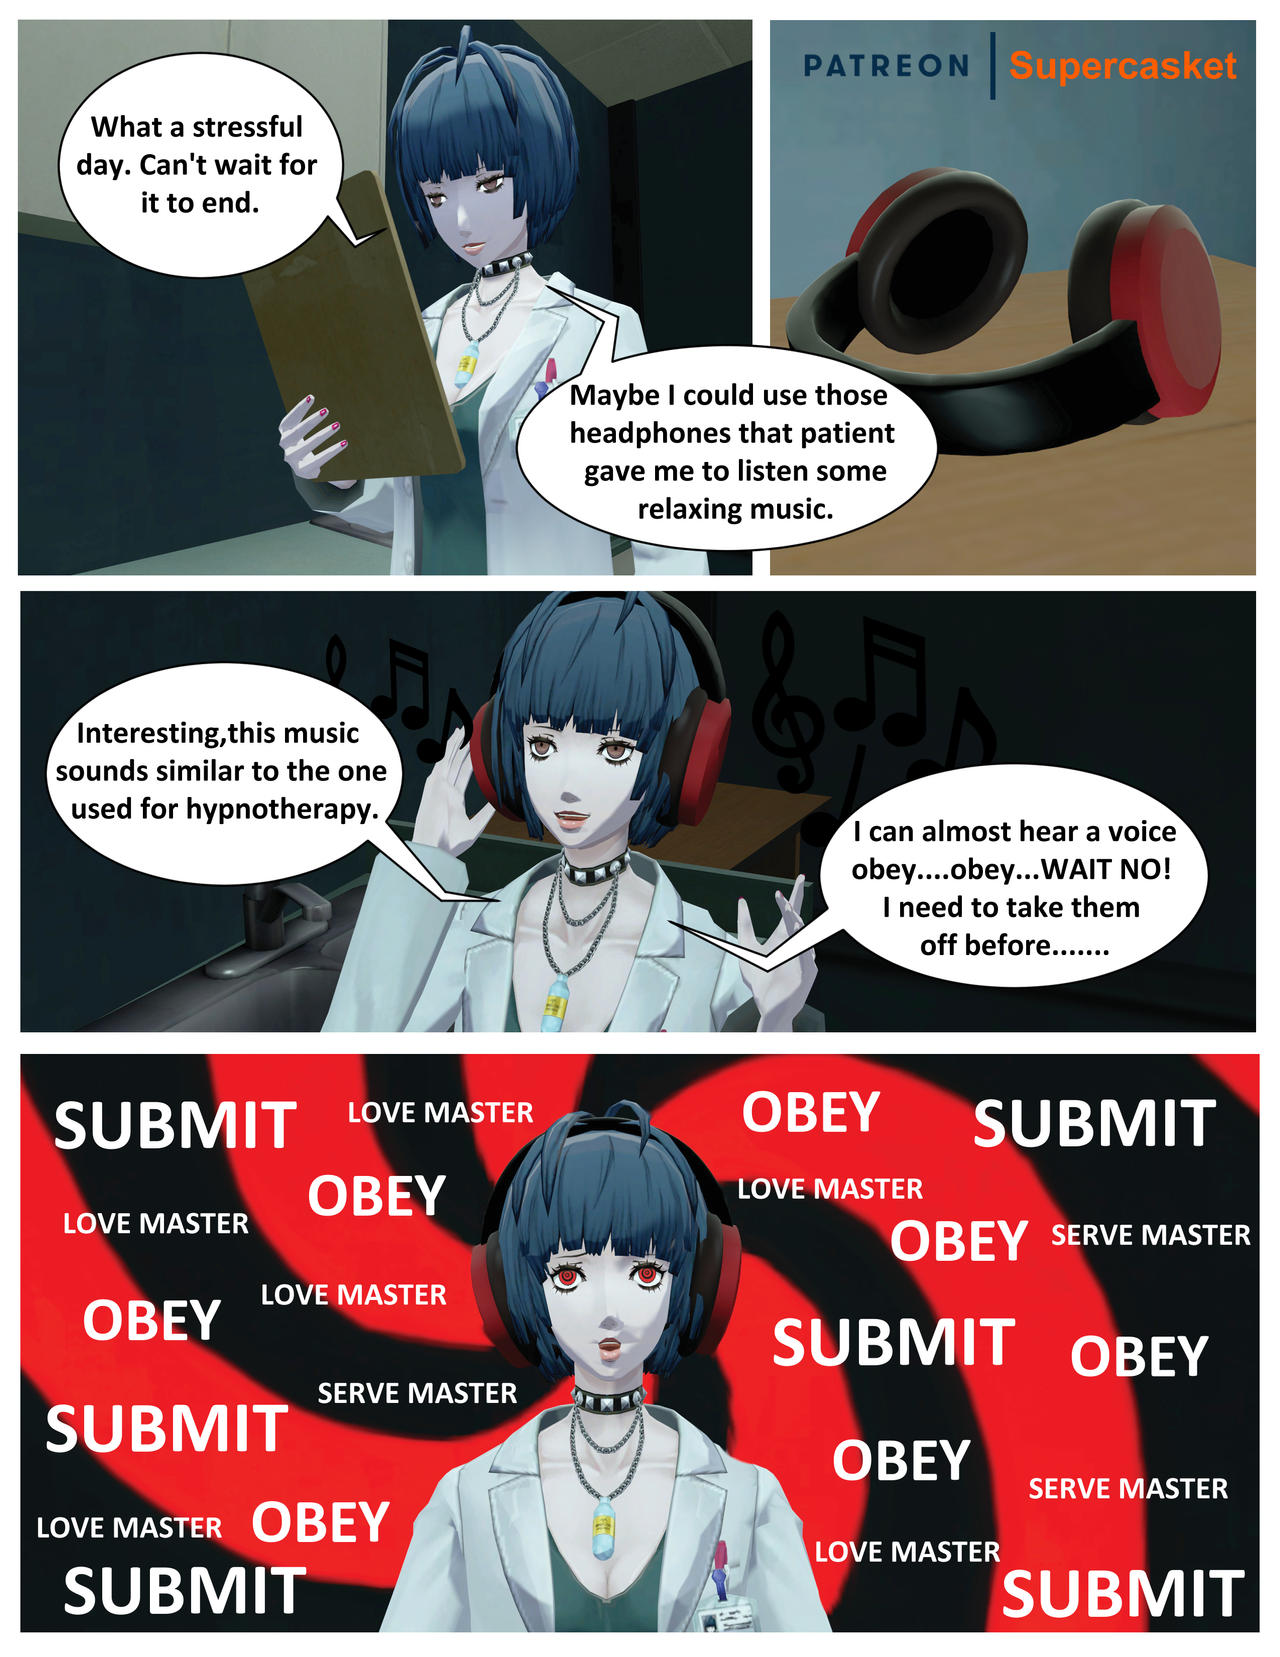 A Gift For Takemi Persona 5 1 2 By Supercasket On Deviantart